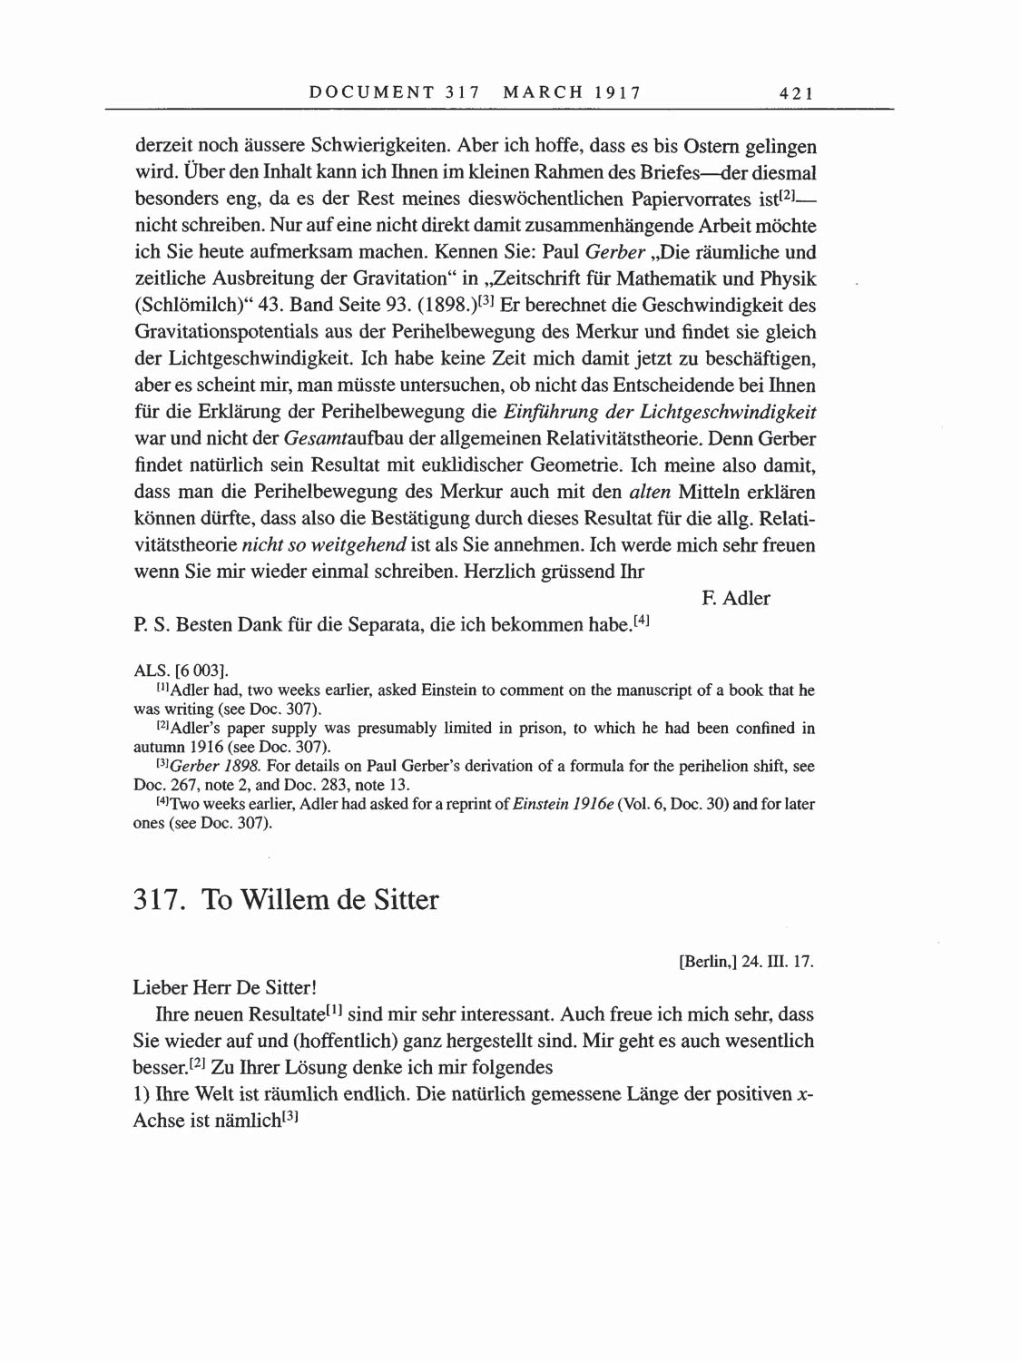 Volume 8, Part A: The Berlin Years: Correspondence 1914-1917 page 421